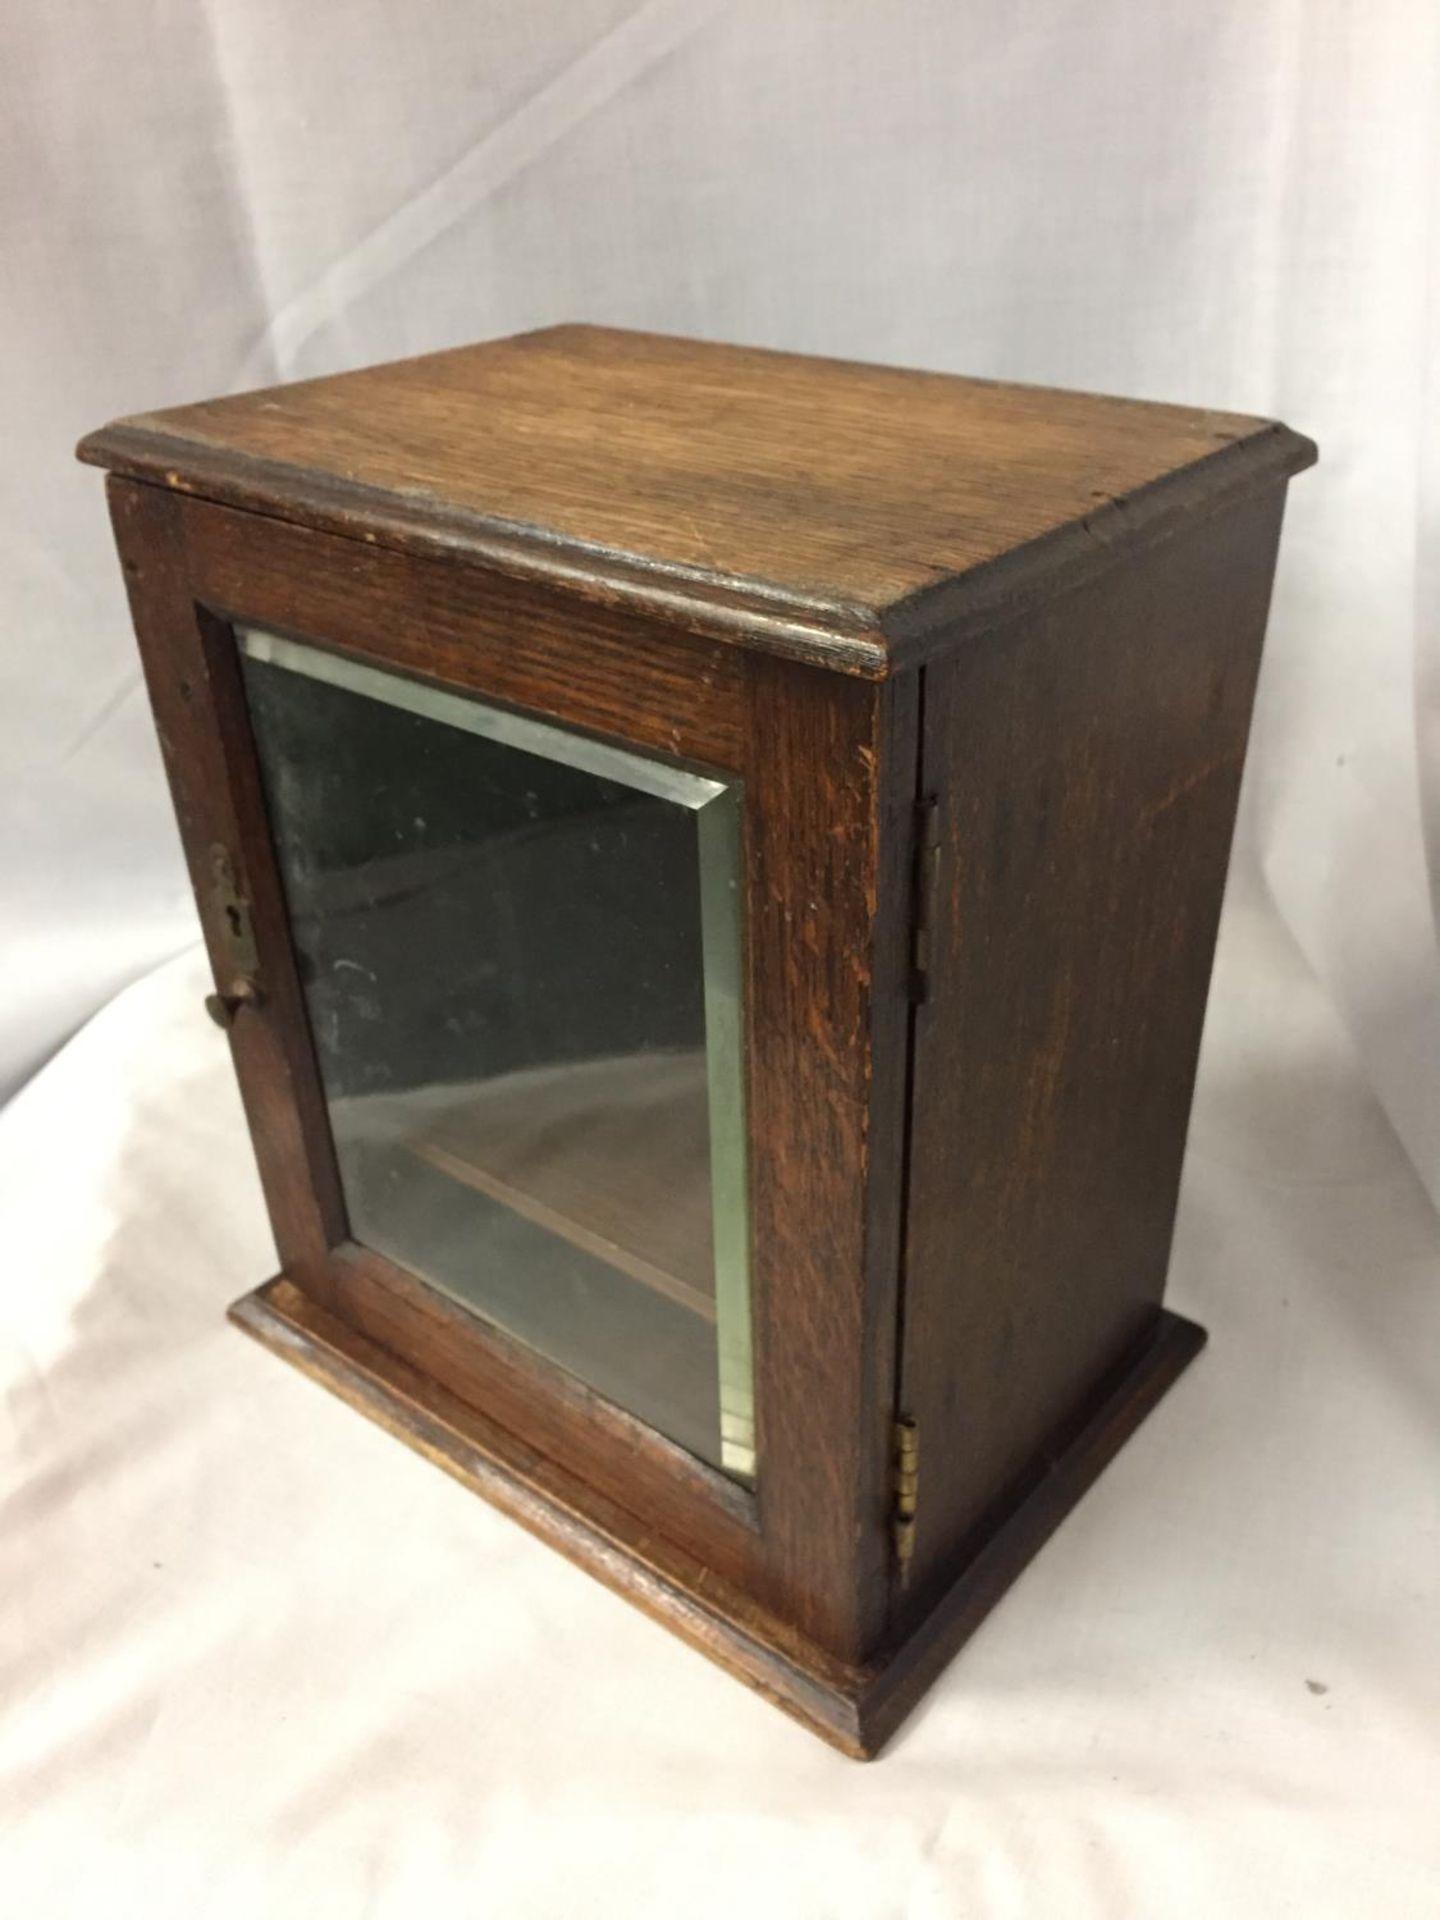 AN MINATURE OAK GLASS FRONTED CABINET HEIGHT 25CM - Image 3 of 3